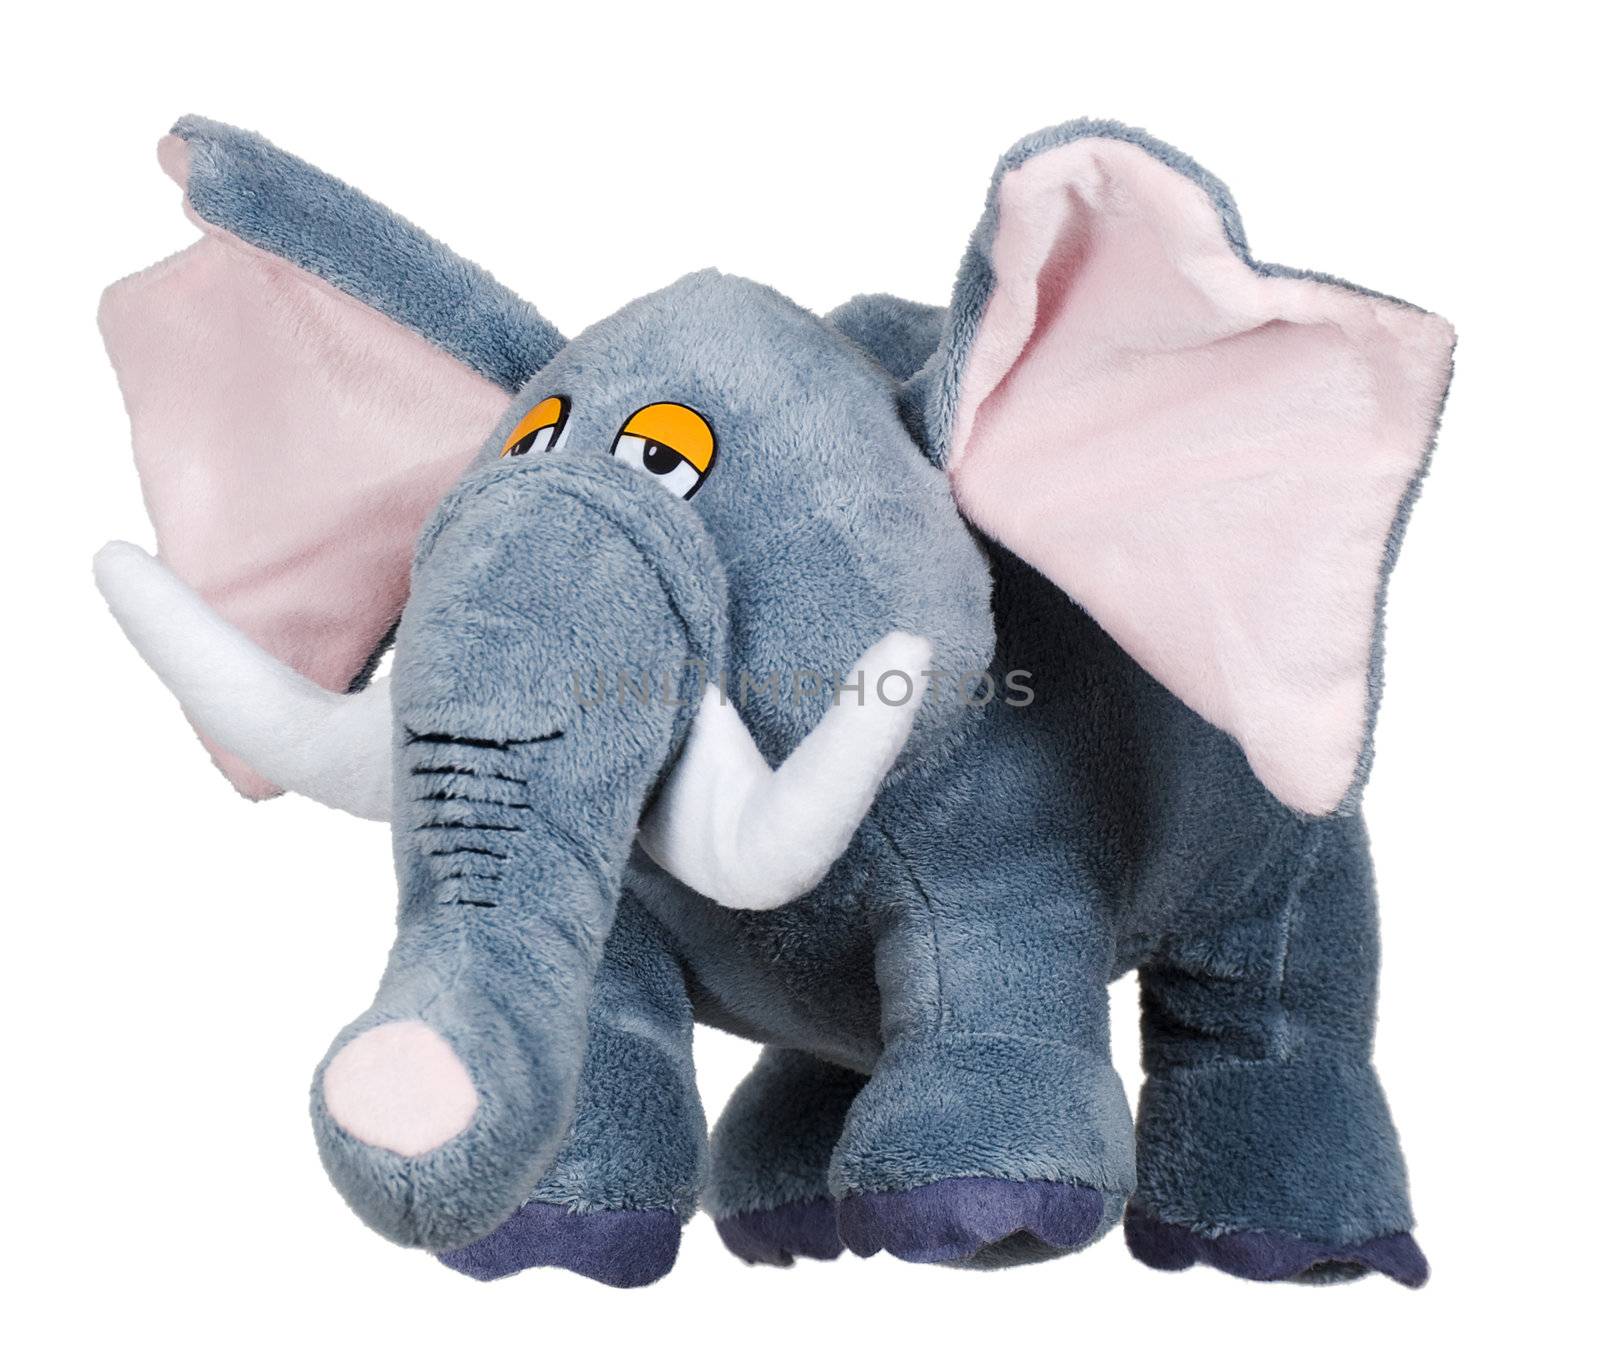 The toy soft elephant on a white background